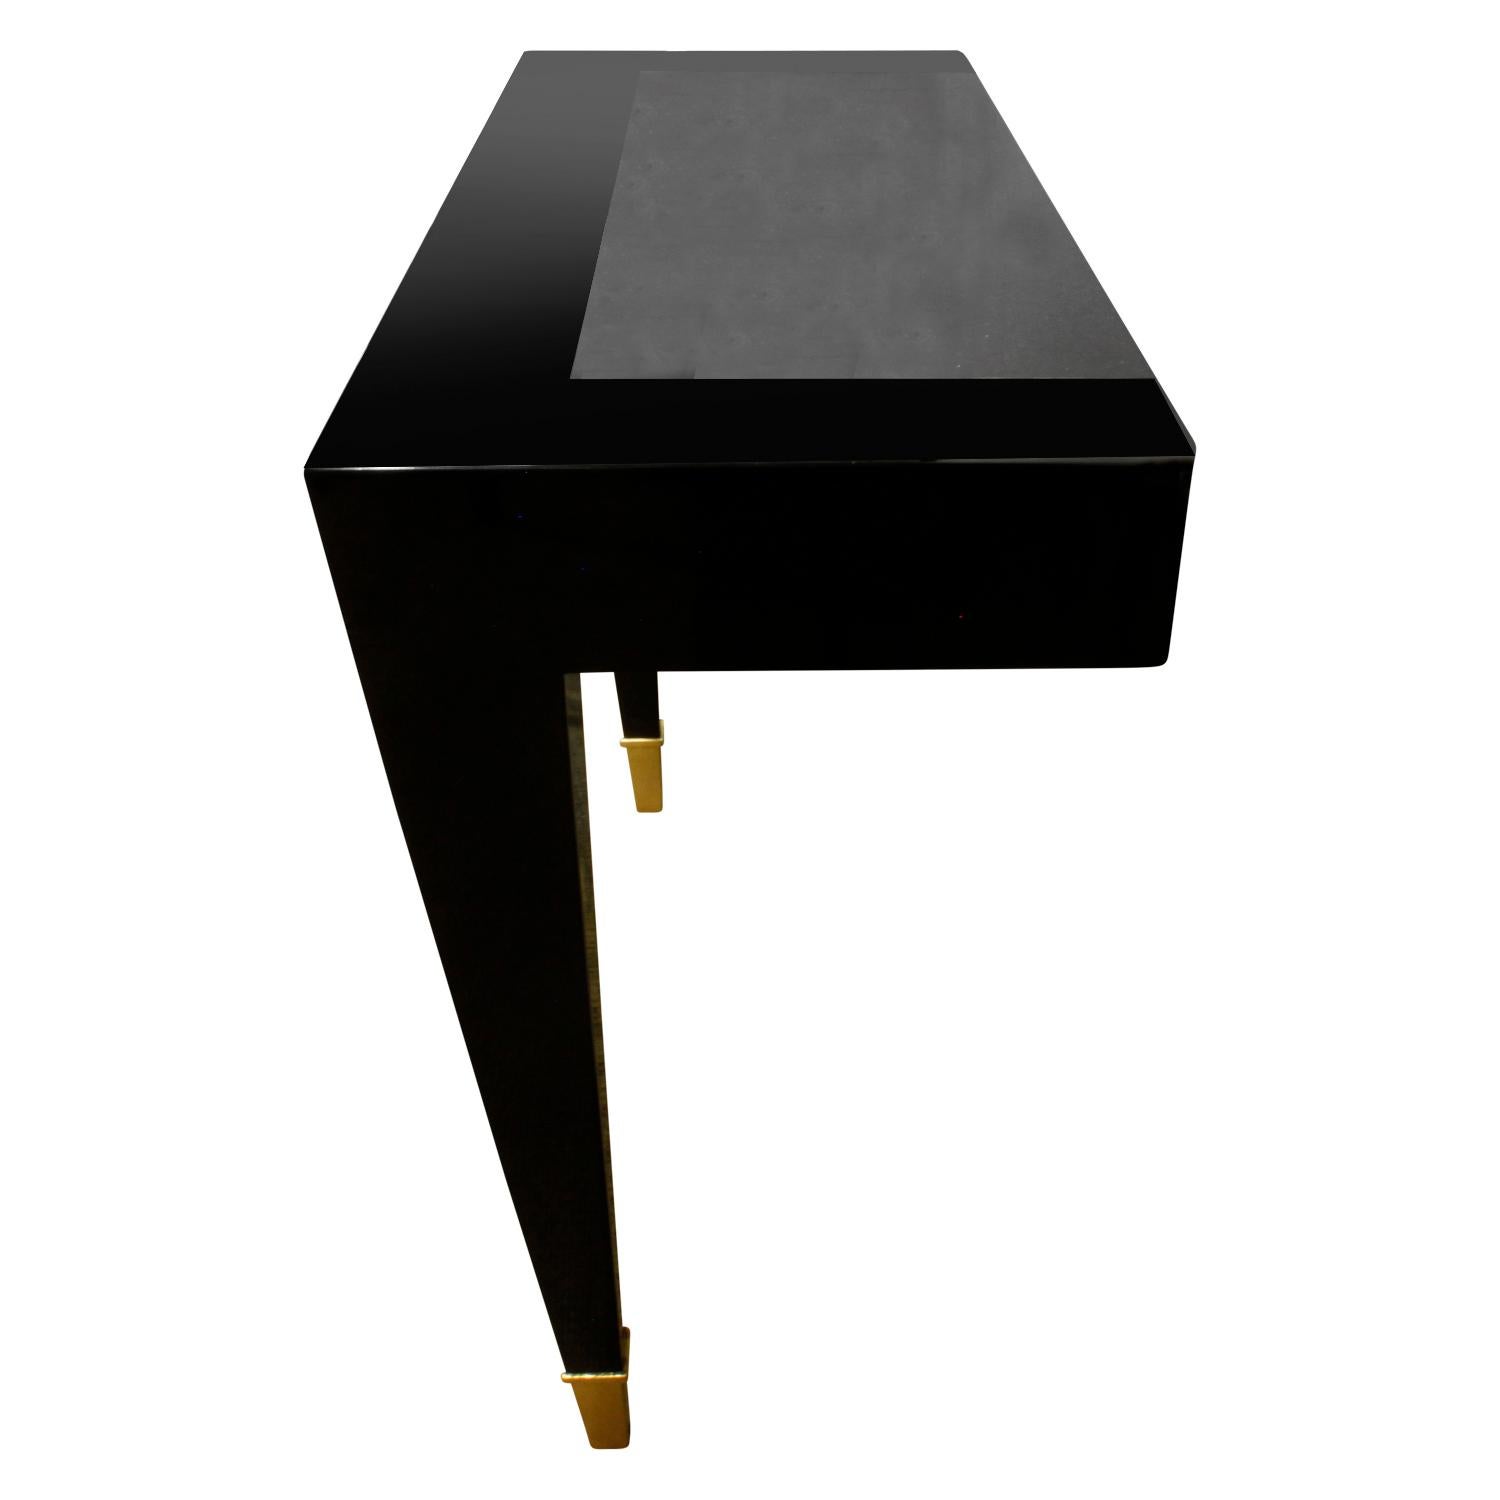 American Pace Black Lacquer Console Table with Inset Granite Top and Brass Sabots, 1980s For Sale